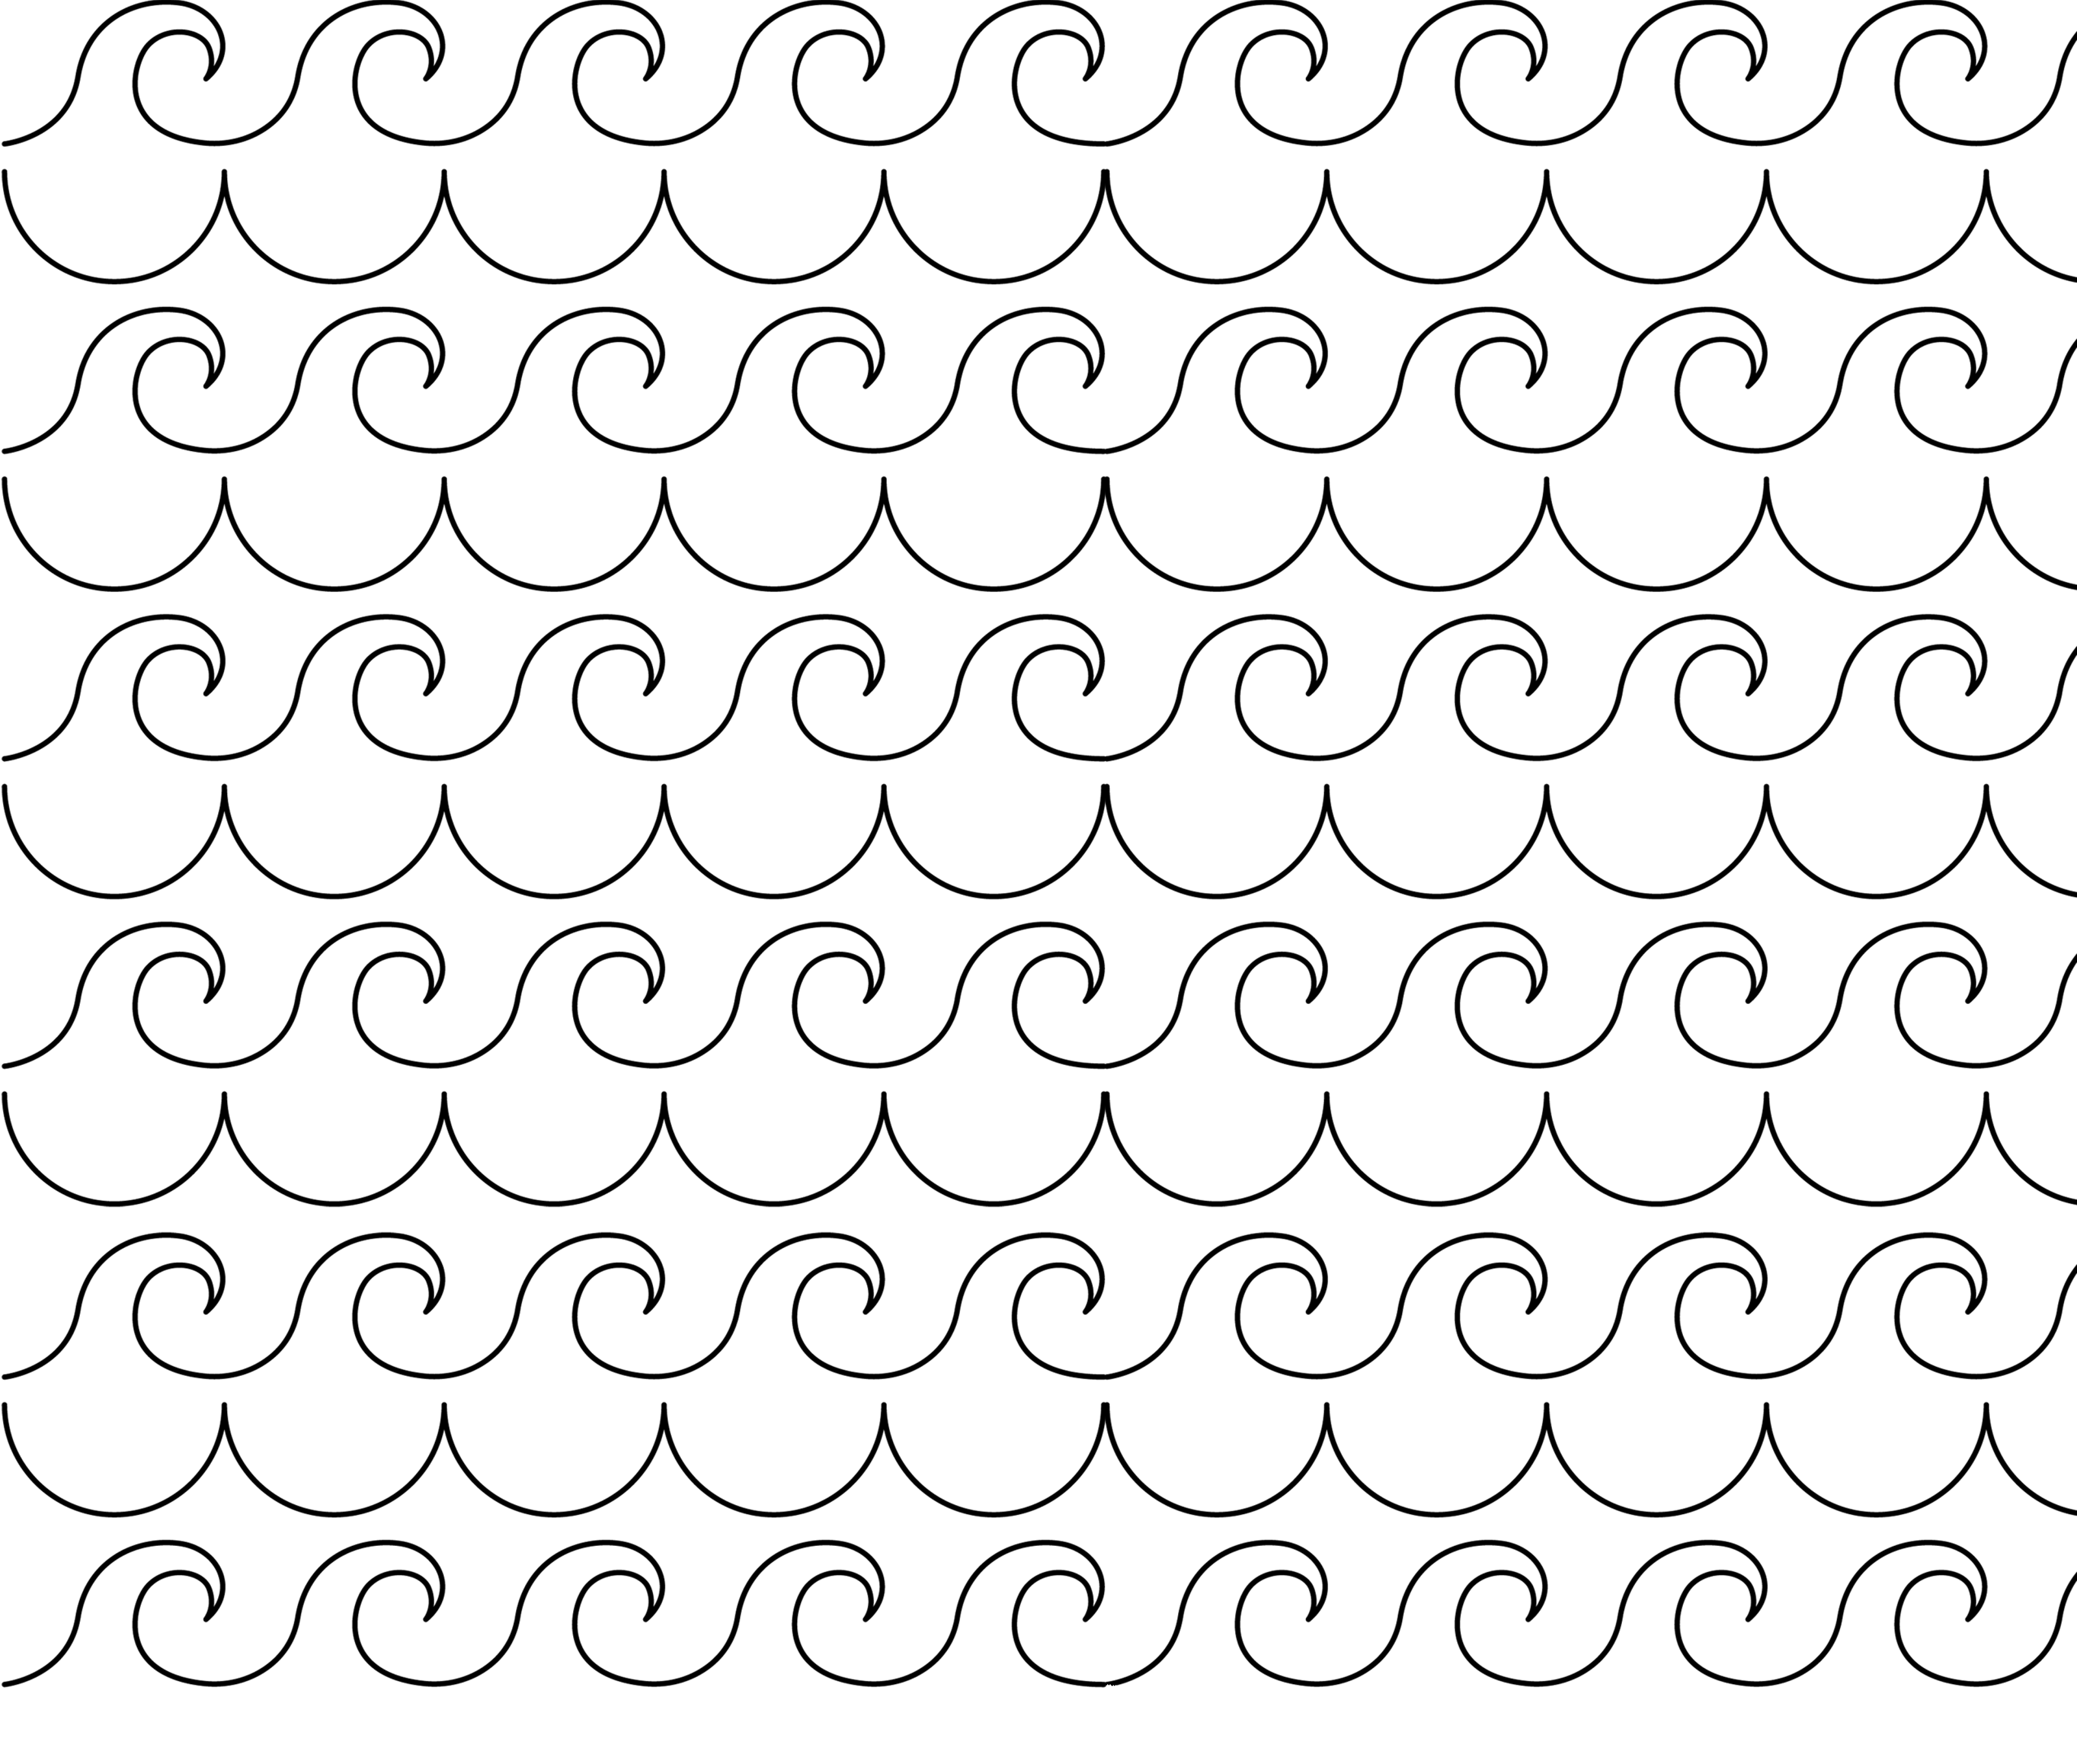 Illustration of 11 waves drawn one under the other as one continuous line.